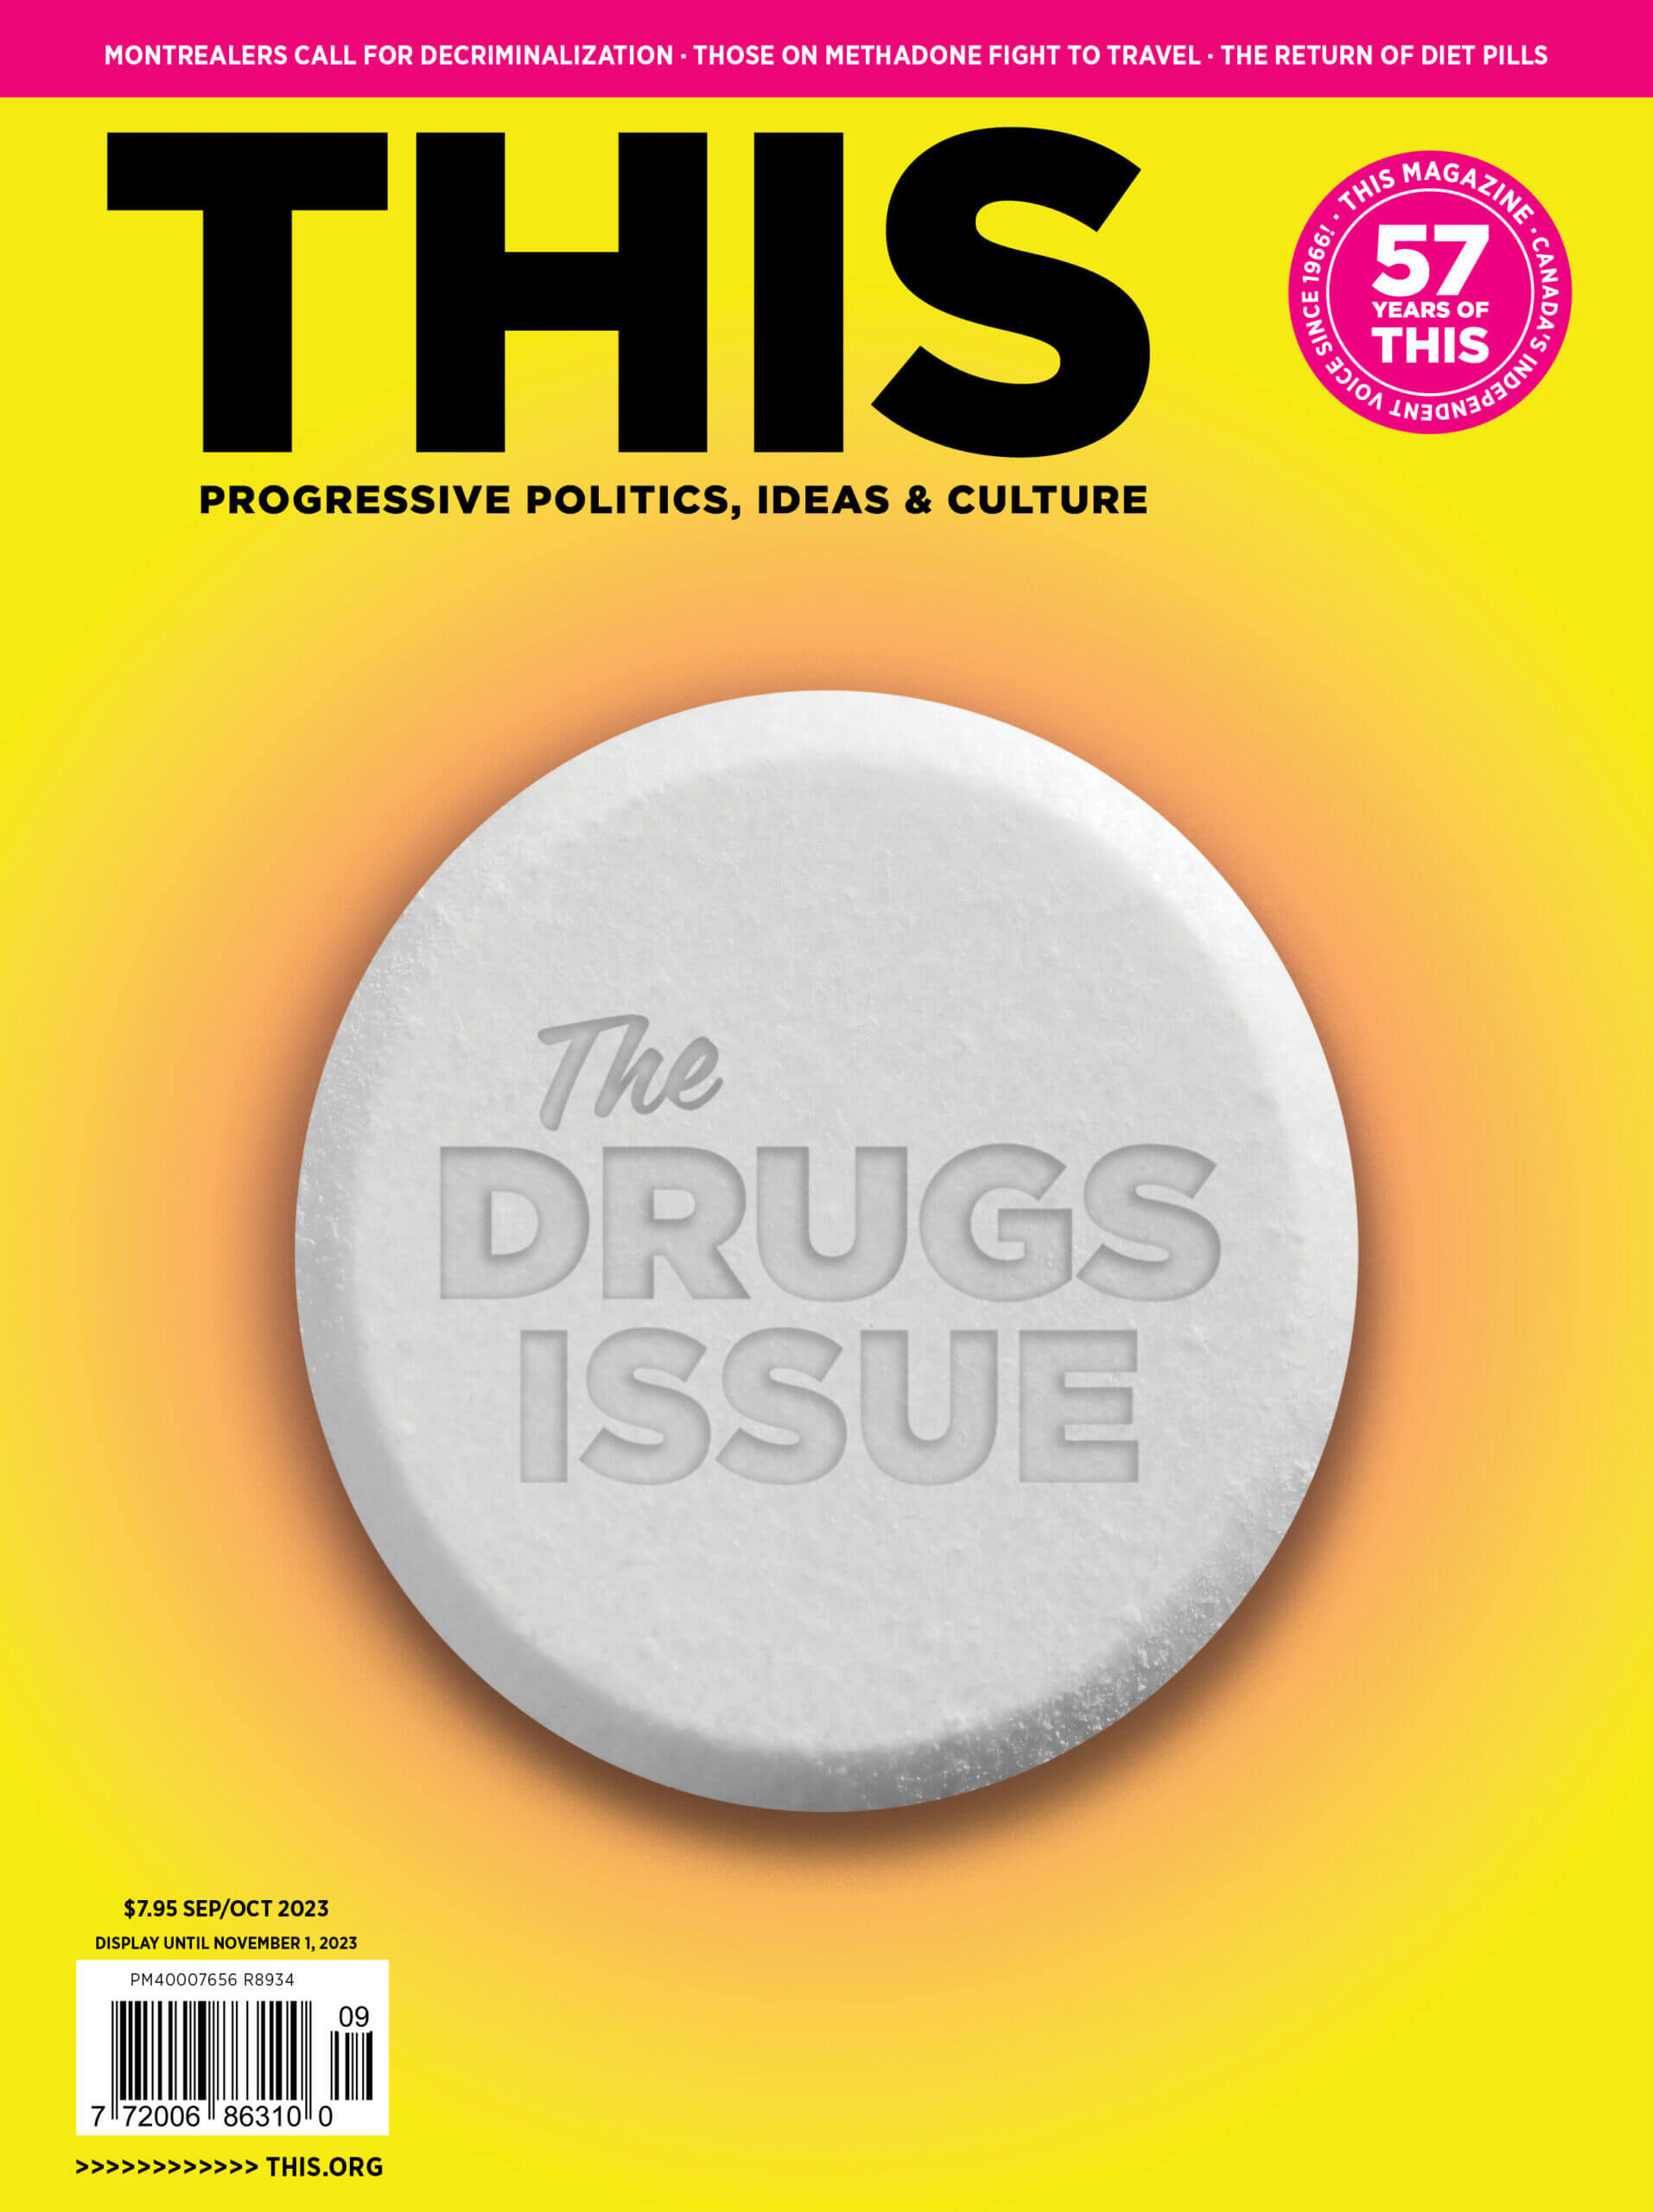 A white pill on a yellow backdrop reads "The Drugs Issue"